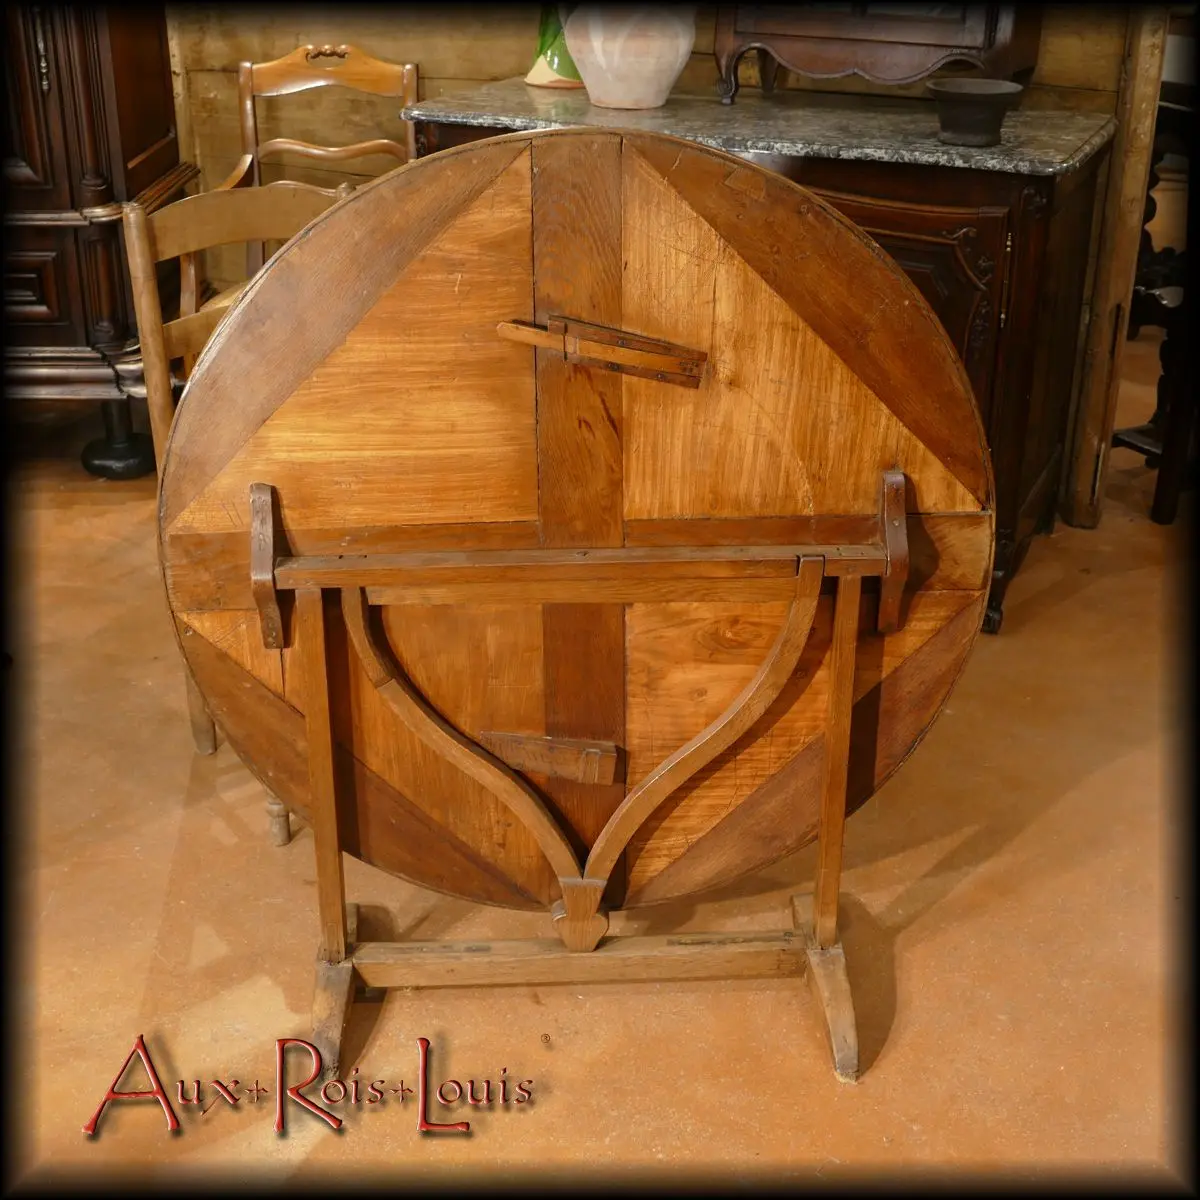 In this raised position, the top reveals the pivoting lyre and the wooden spring from below to fix it to ensure the stability of the top in the table position.